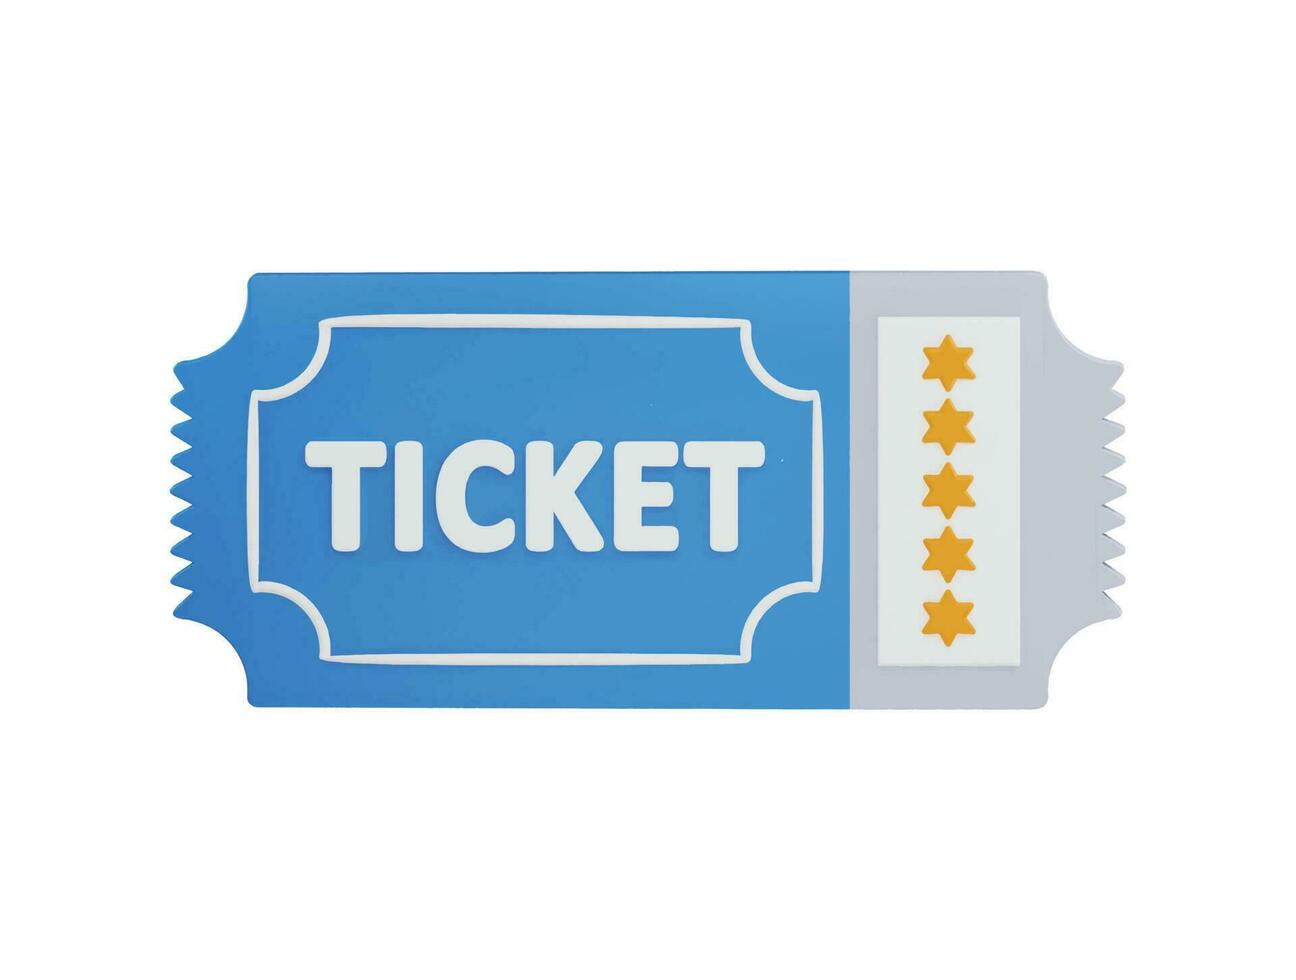 Ticket with five stars icon 3d rendering vector illustration